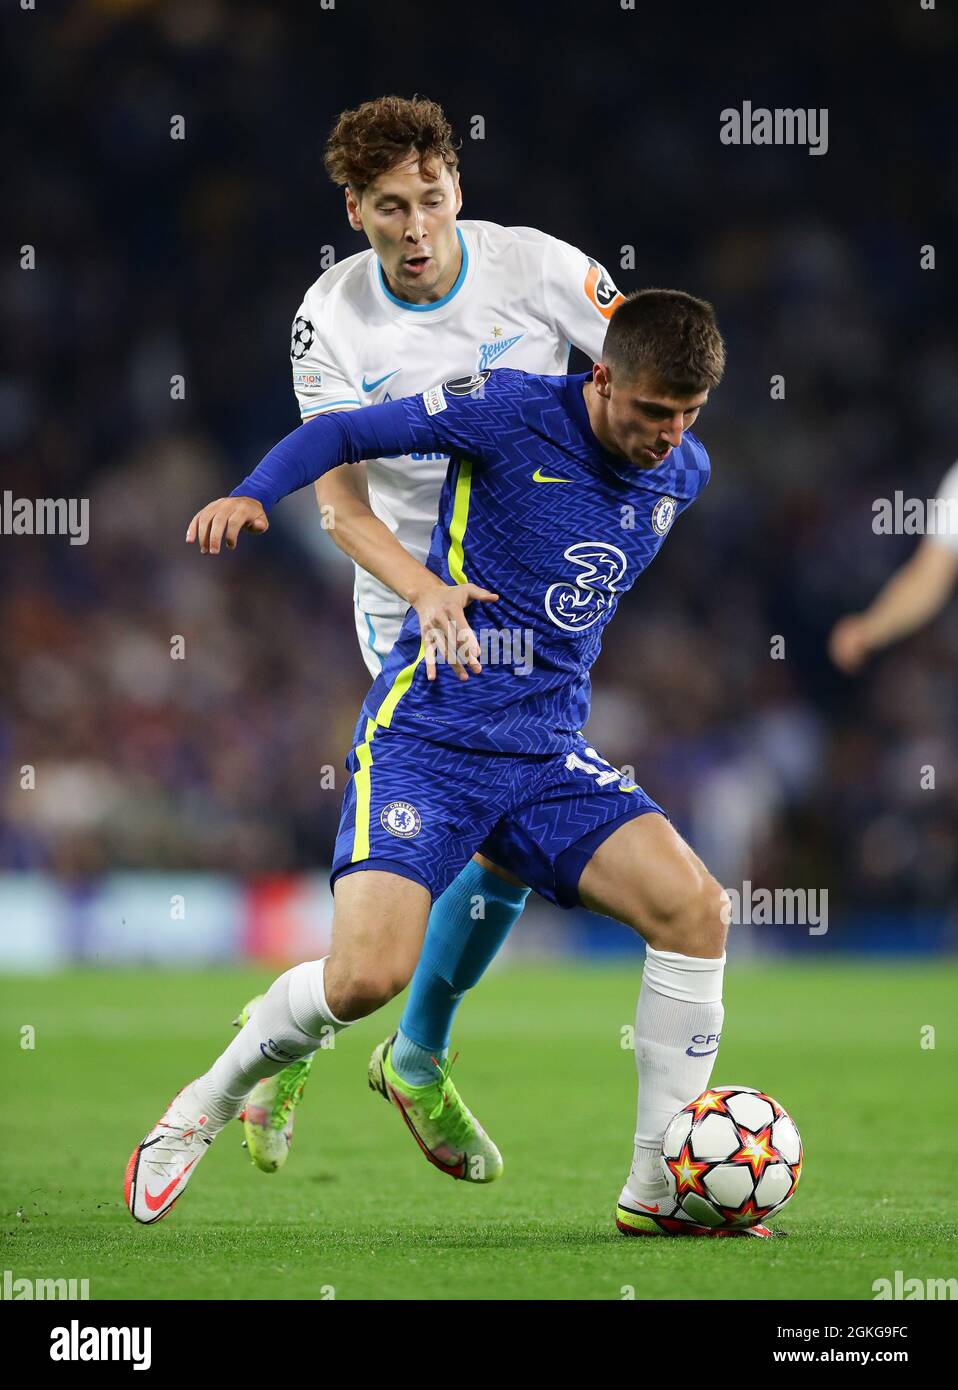 London, England, 14th September 2021. Mason Mount of Chelsea with Daler Kuzyayev of Zenit during the UEFA Champions League match at Stamford Bridge, London. Picture credit should read: David Klein / Sportimage Stock Photo